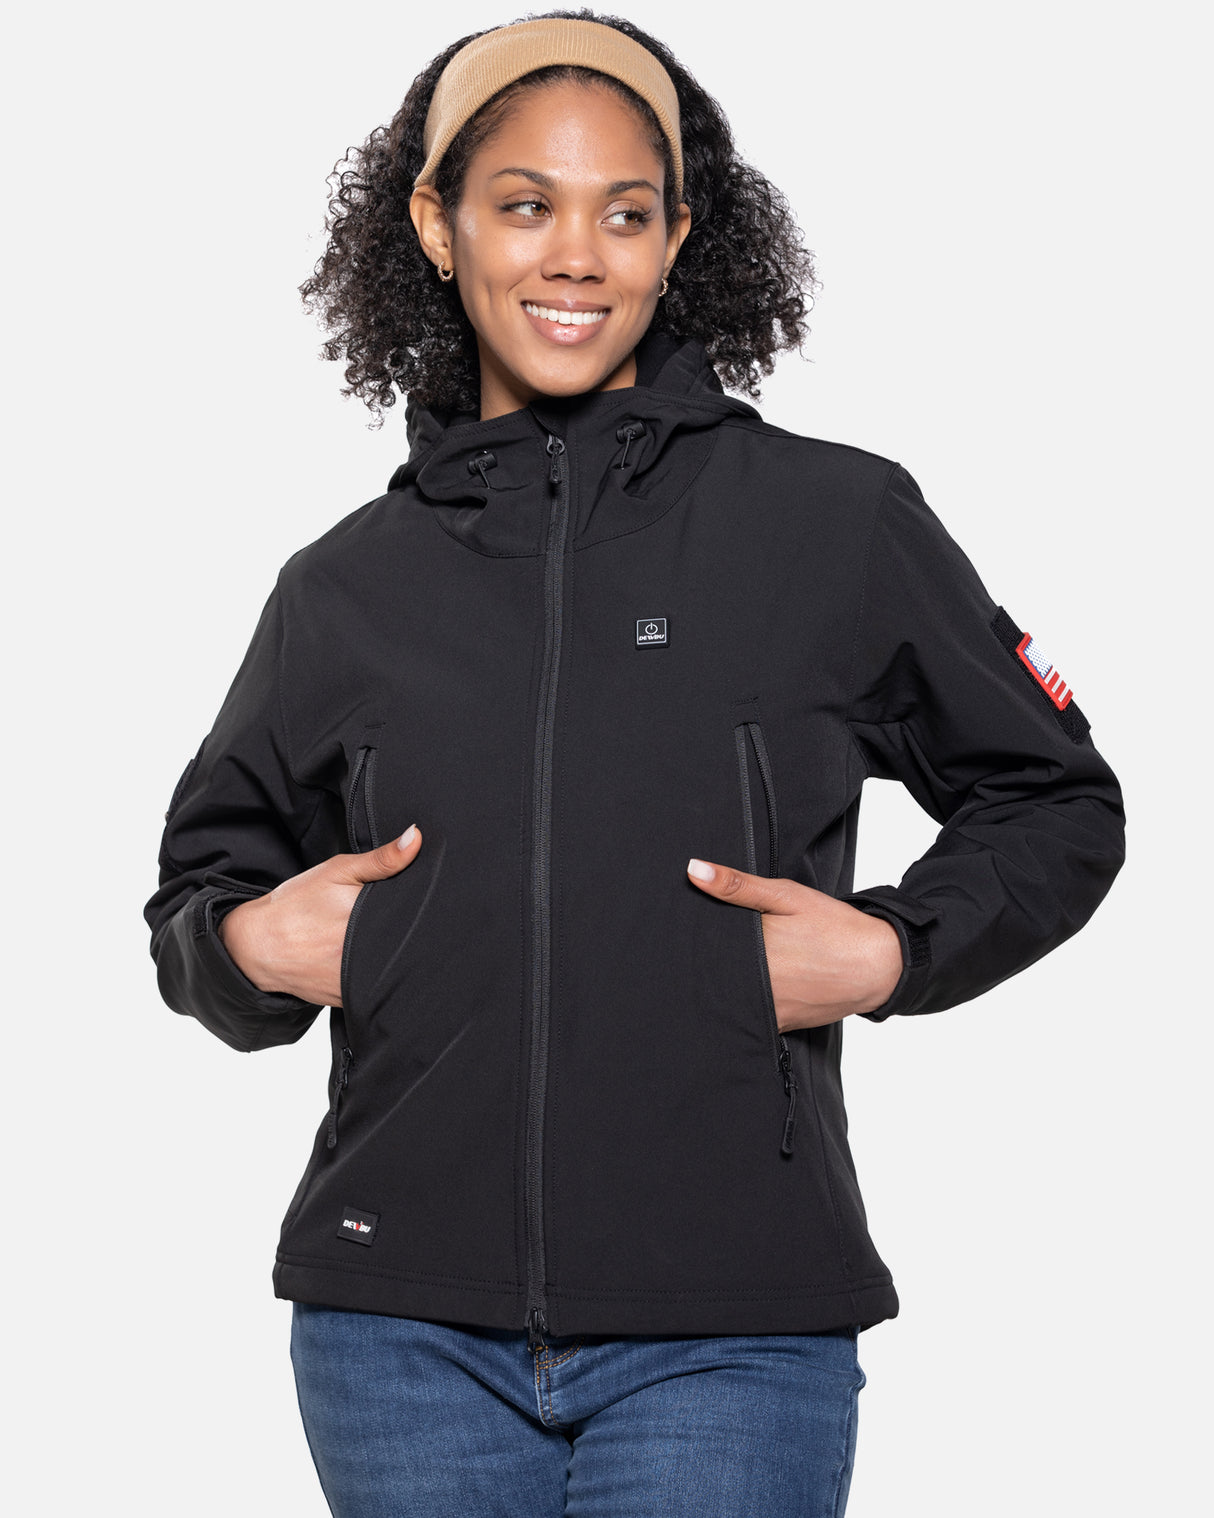 Women's Soft Shell Heated Jacket With 12V Battery Pack - Black